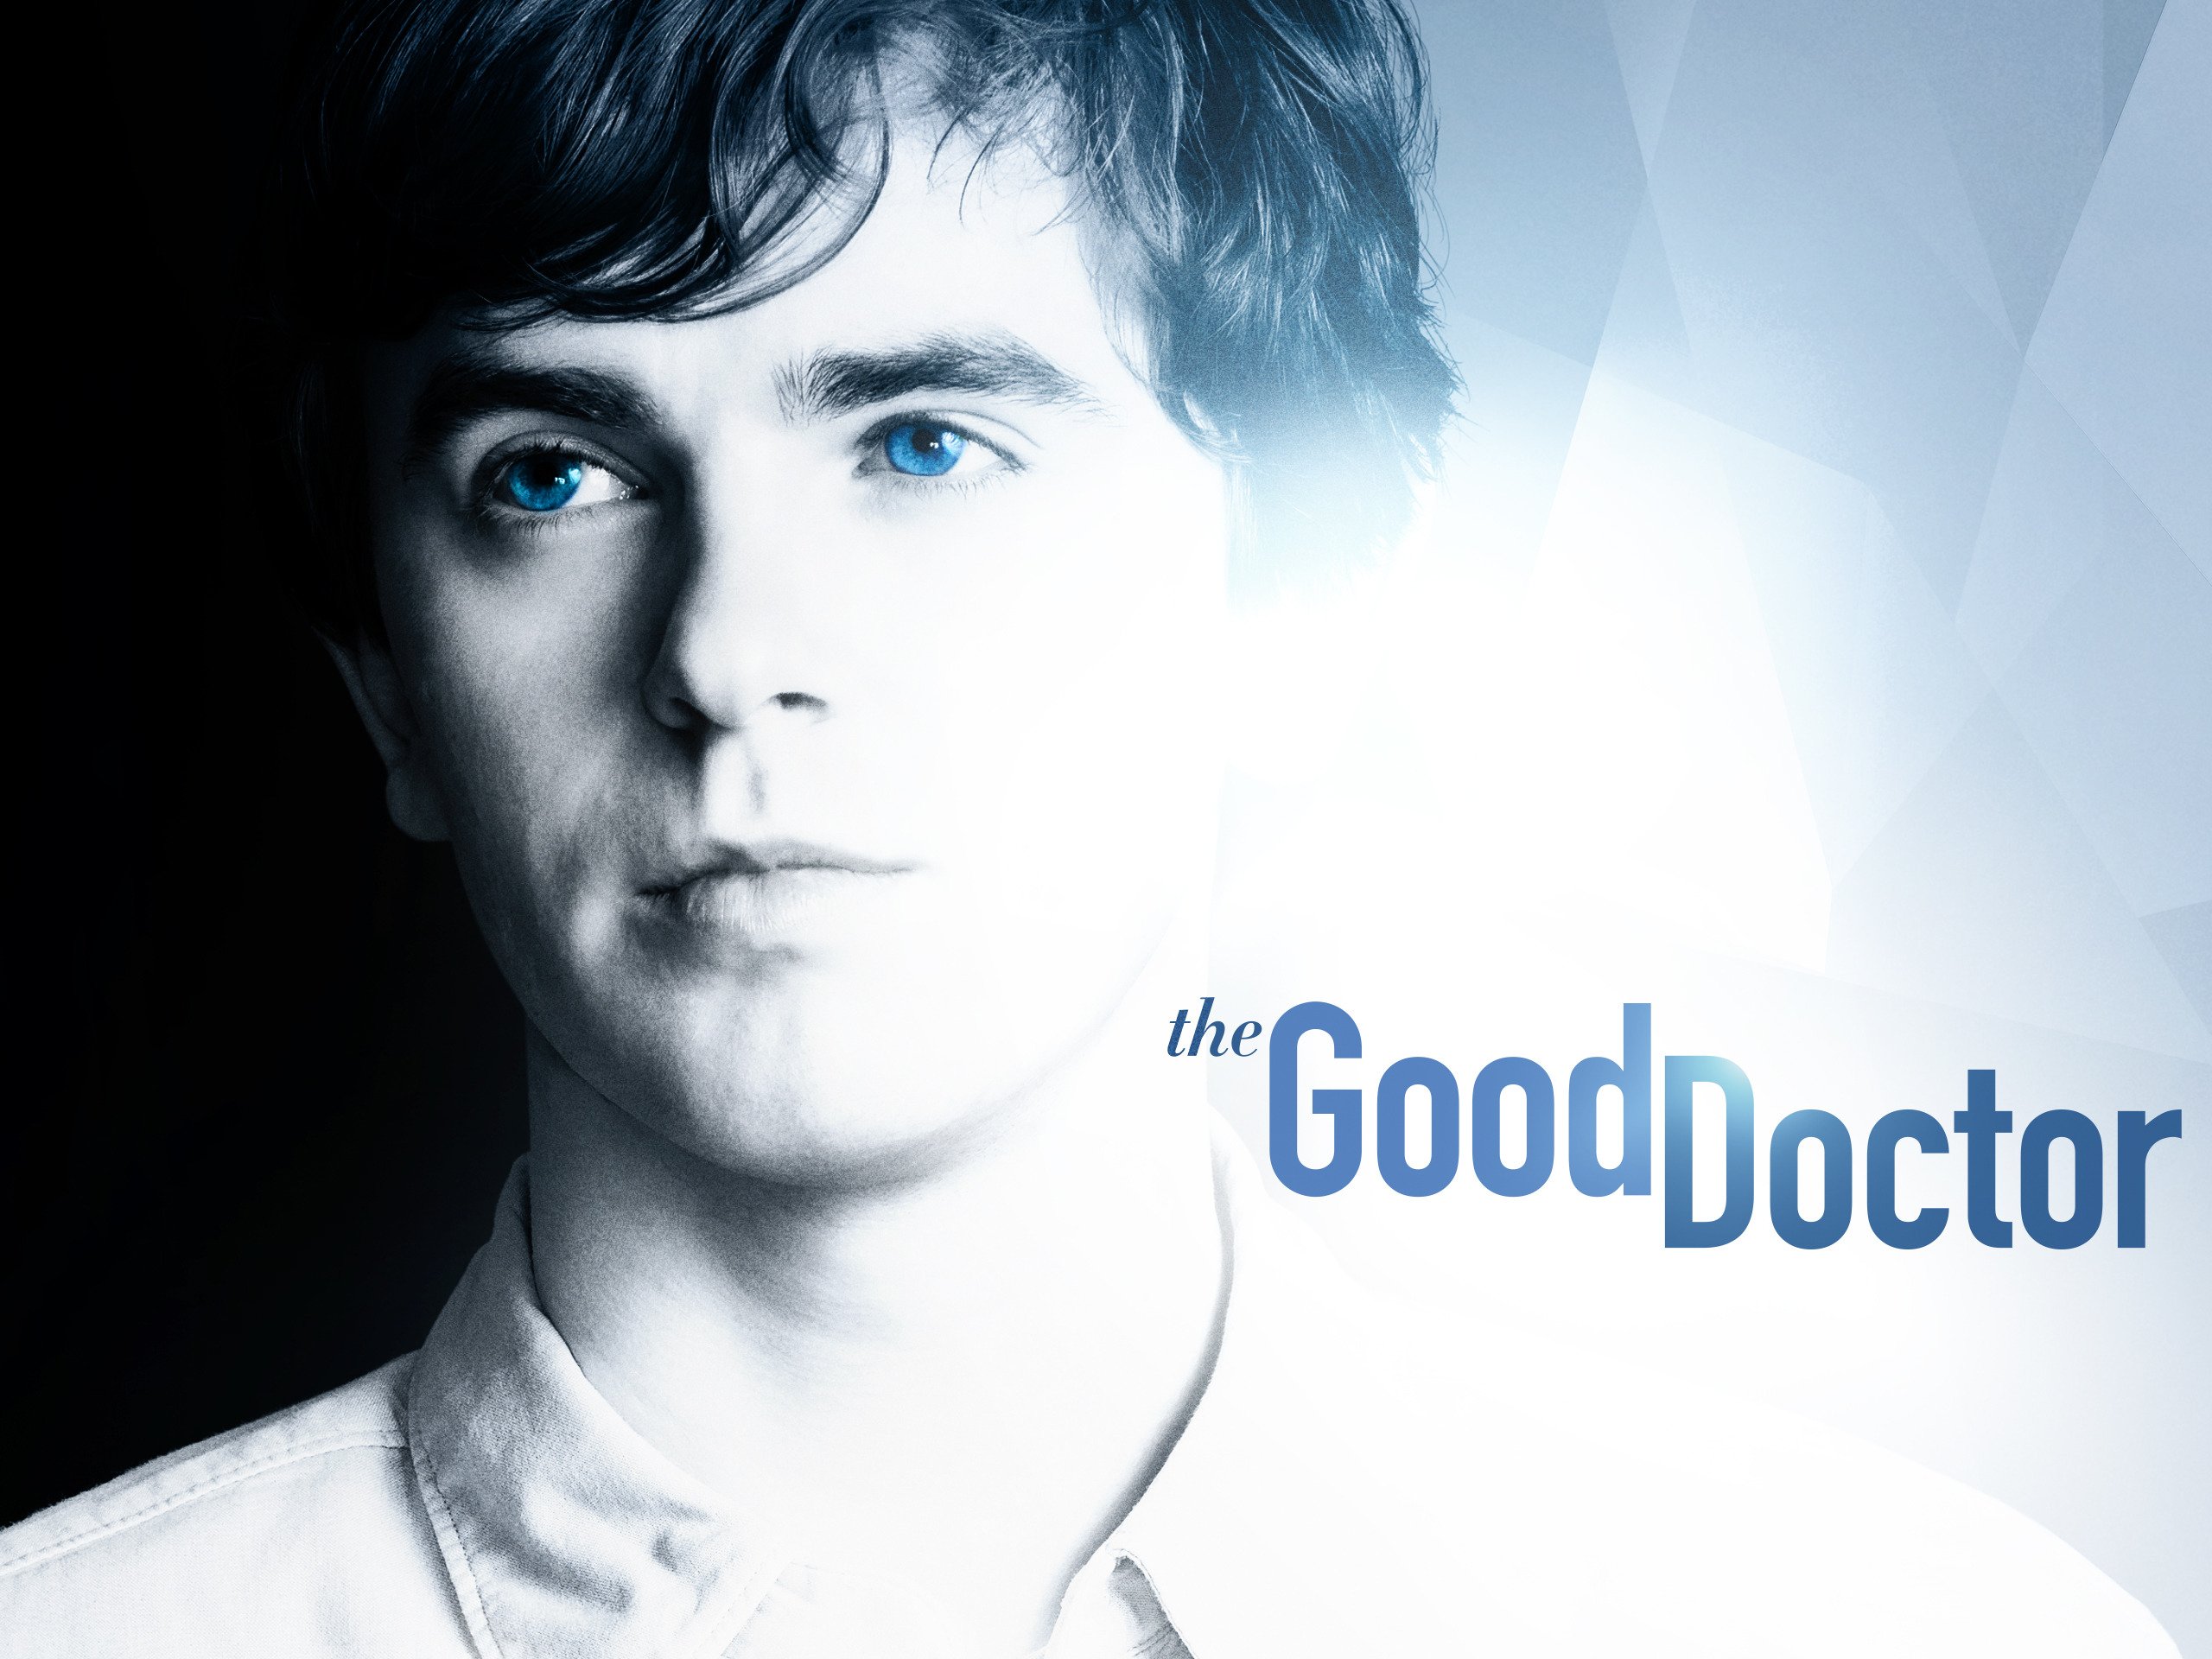 The Good Doctor S7E2 "Skin in the Game" Cast, Plot, New Tonight